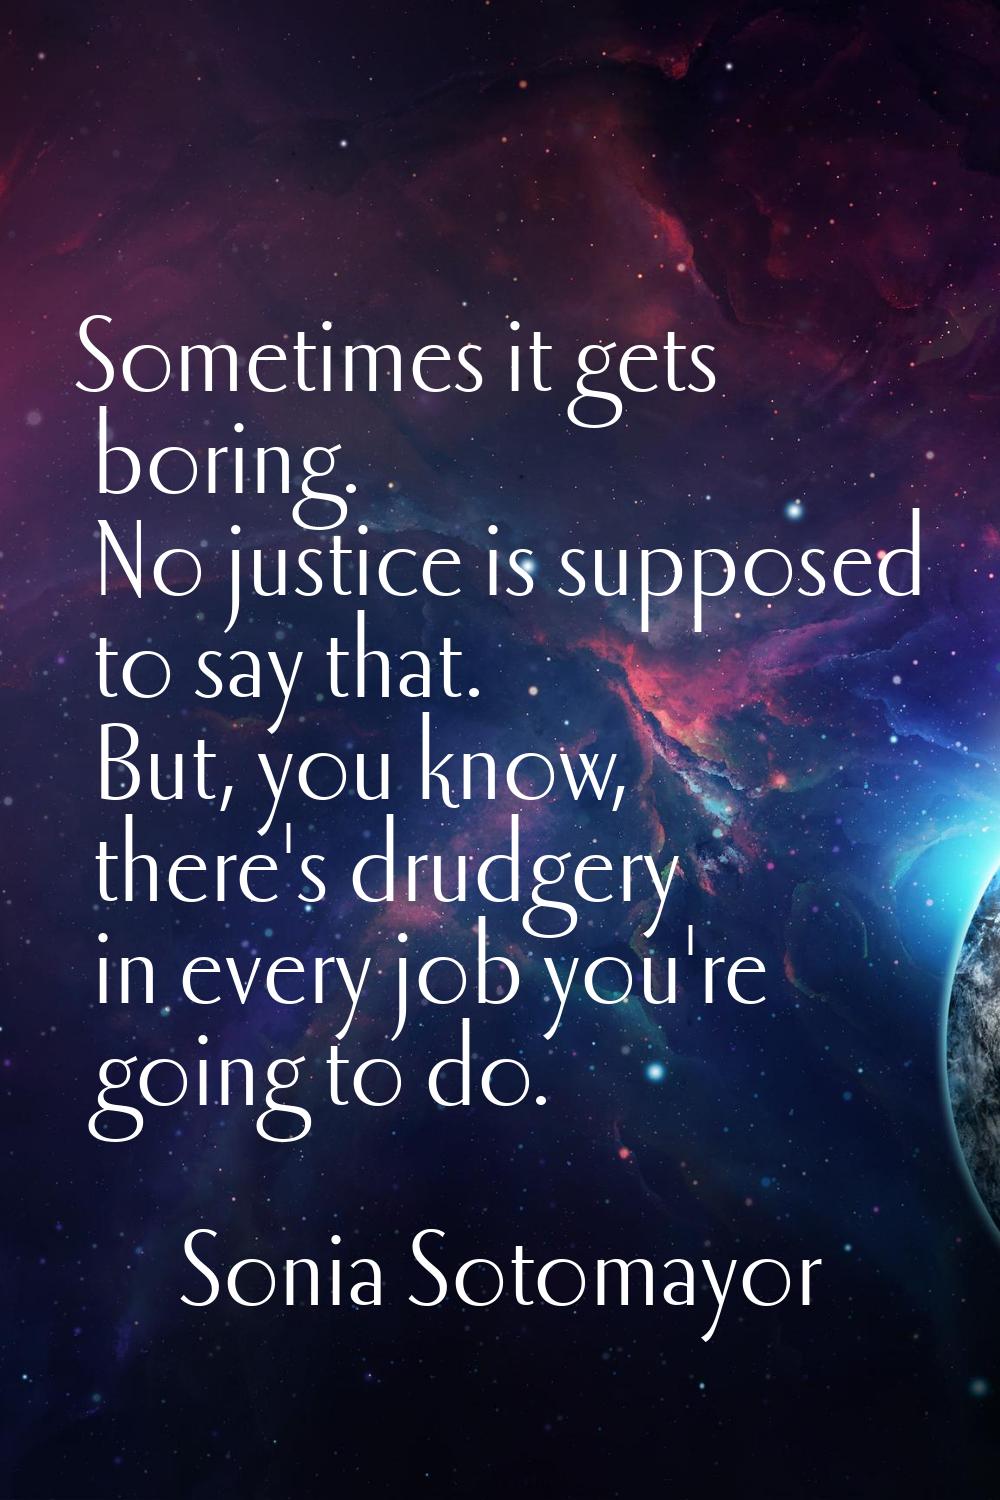 Sometimes it gets boring. No justice is supposed to say that. But, you know, there's drudgery in ev